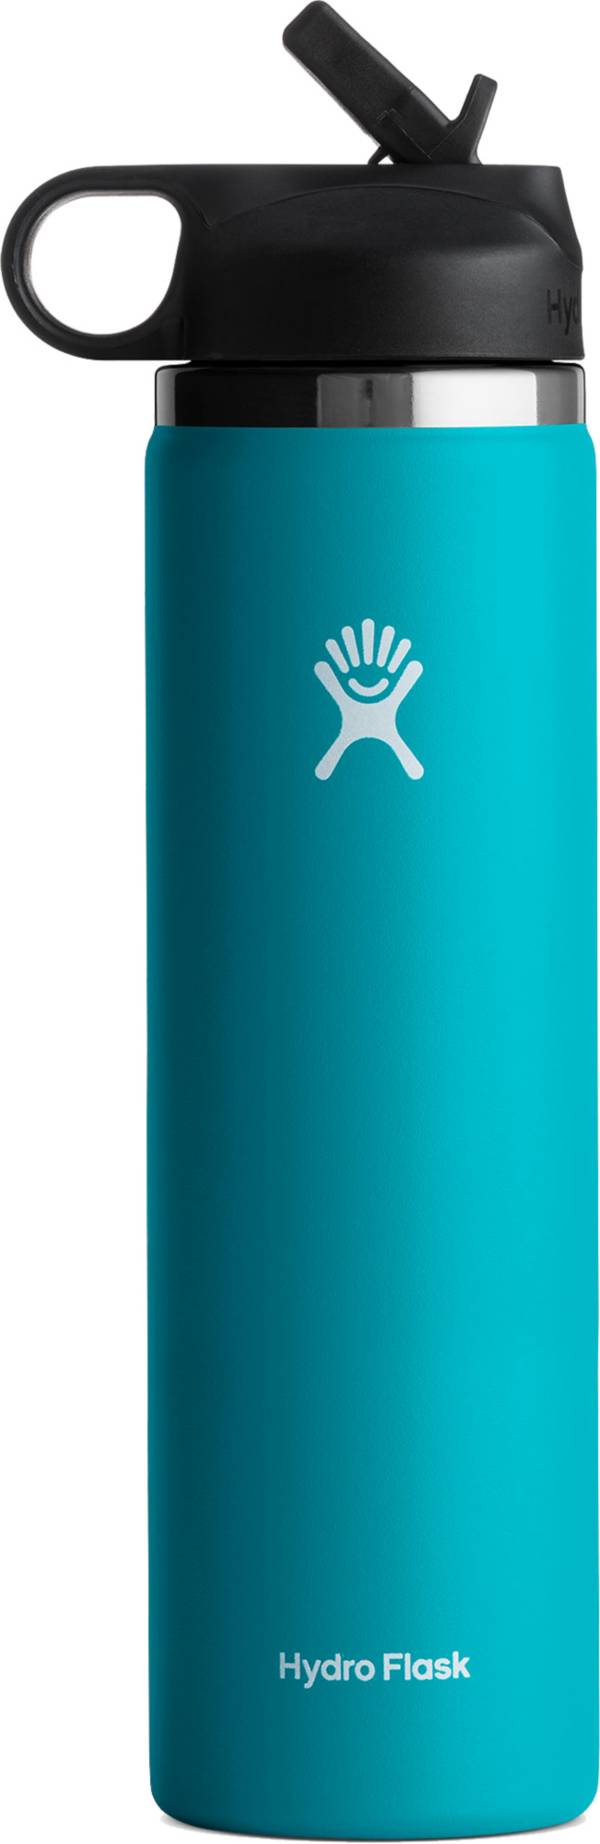 Hydro Flask 24 oz. Wide Mouth Bottle with Straw Lid product image